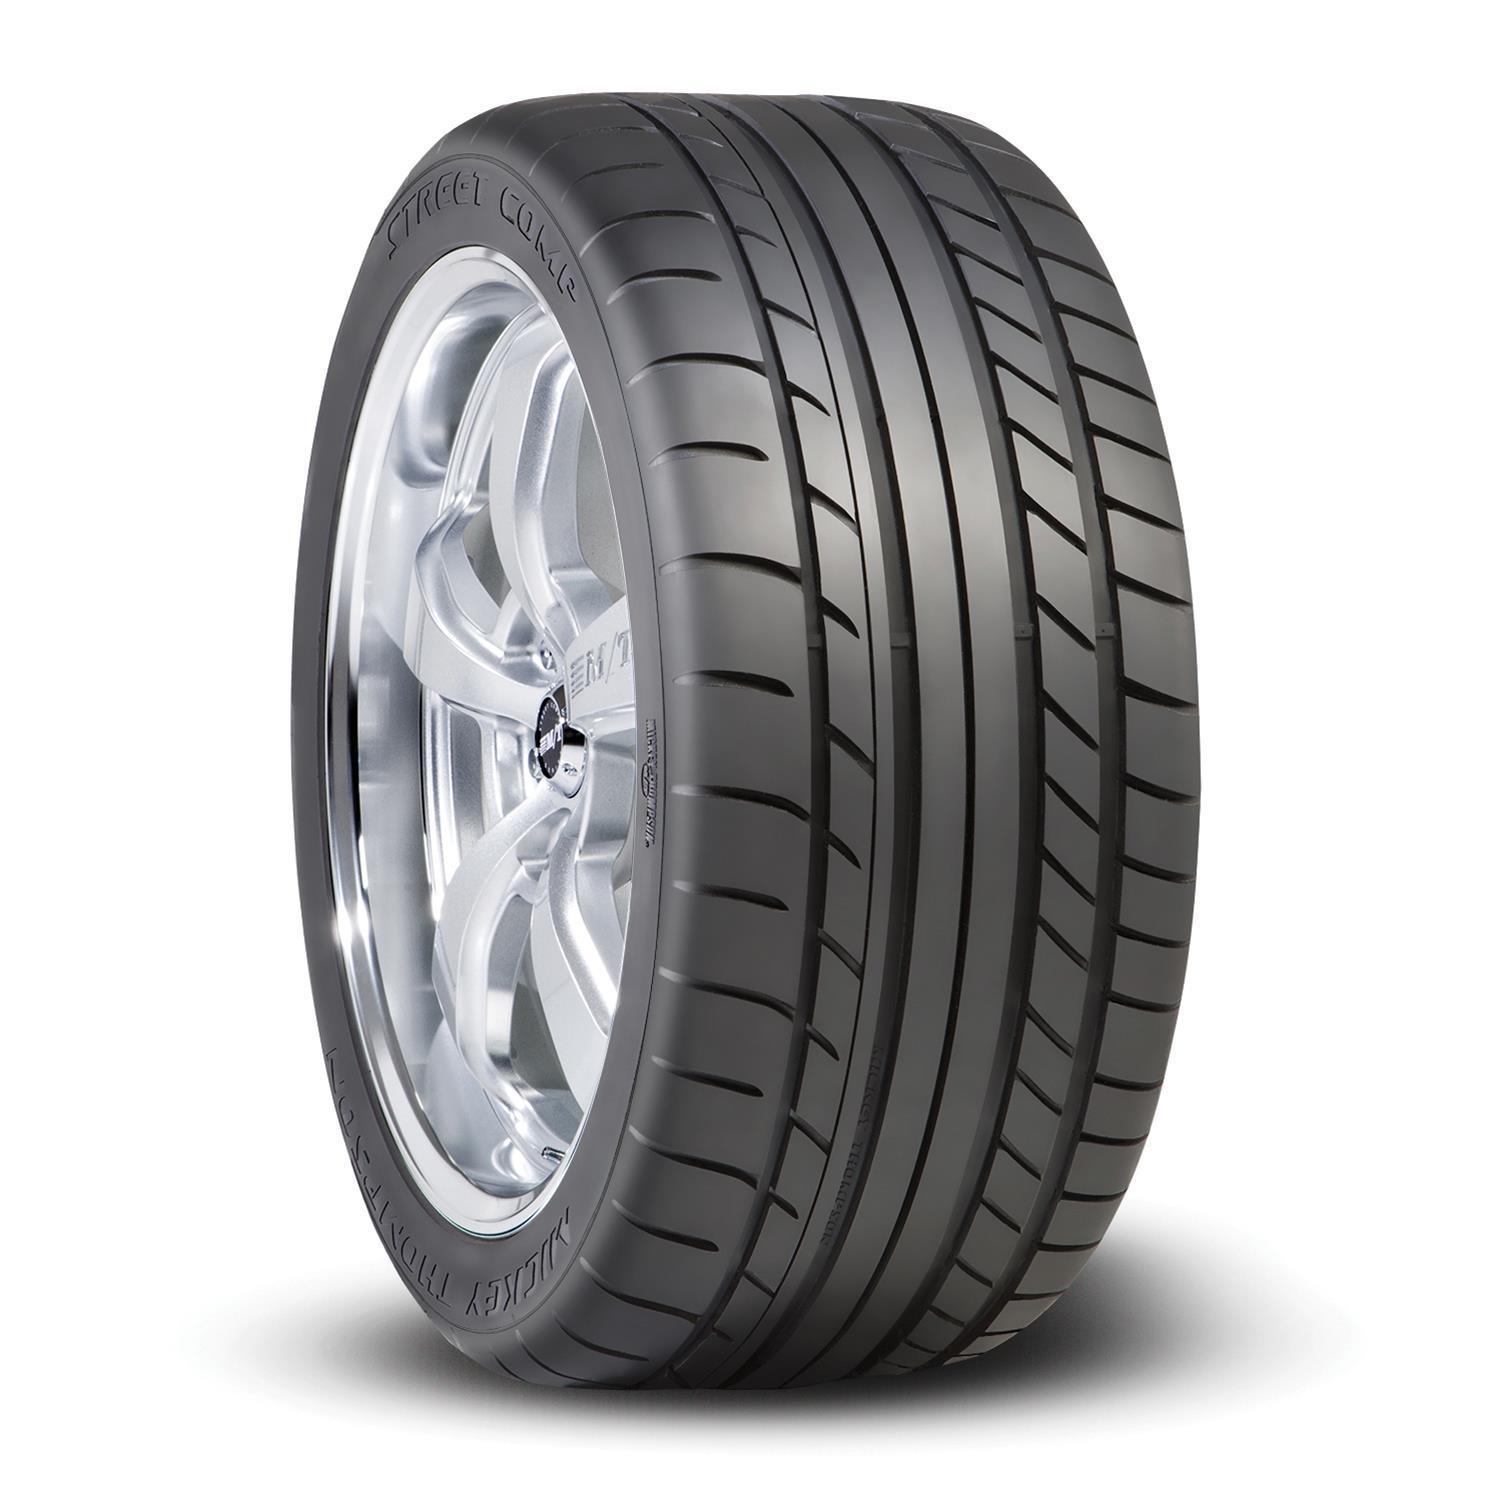 275/40R20 UHP Street Comp Tire - Burlile Performance Products